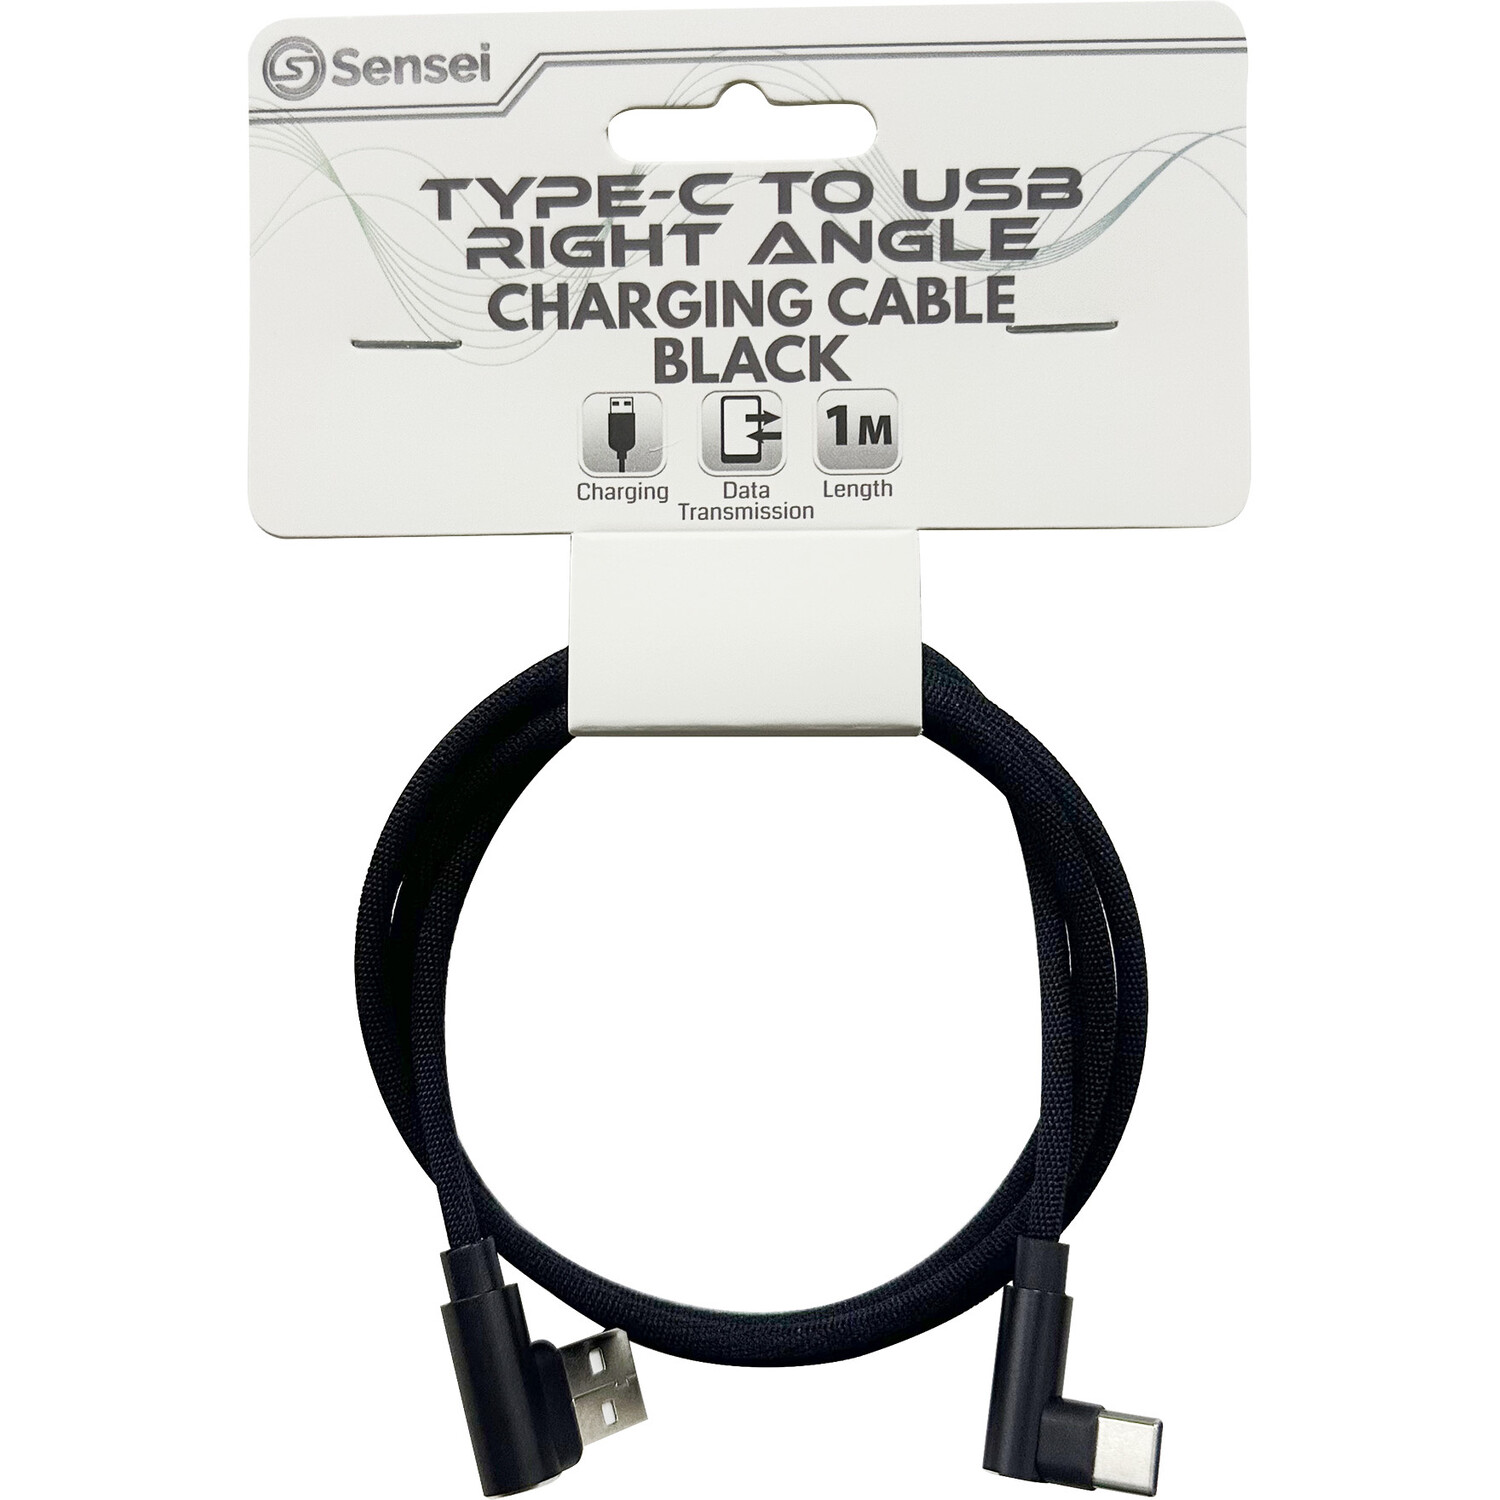 Type-C to USB Right Angle Cable Image